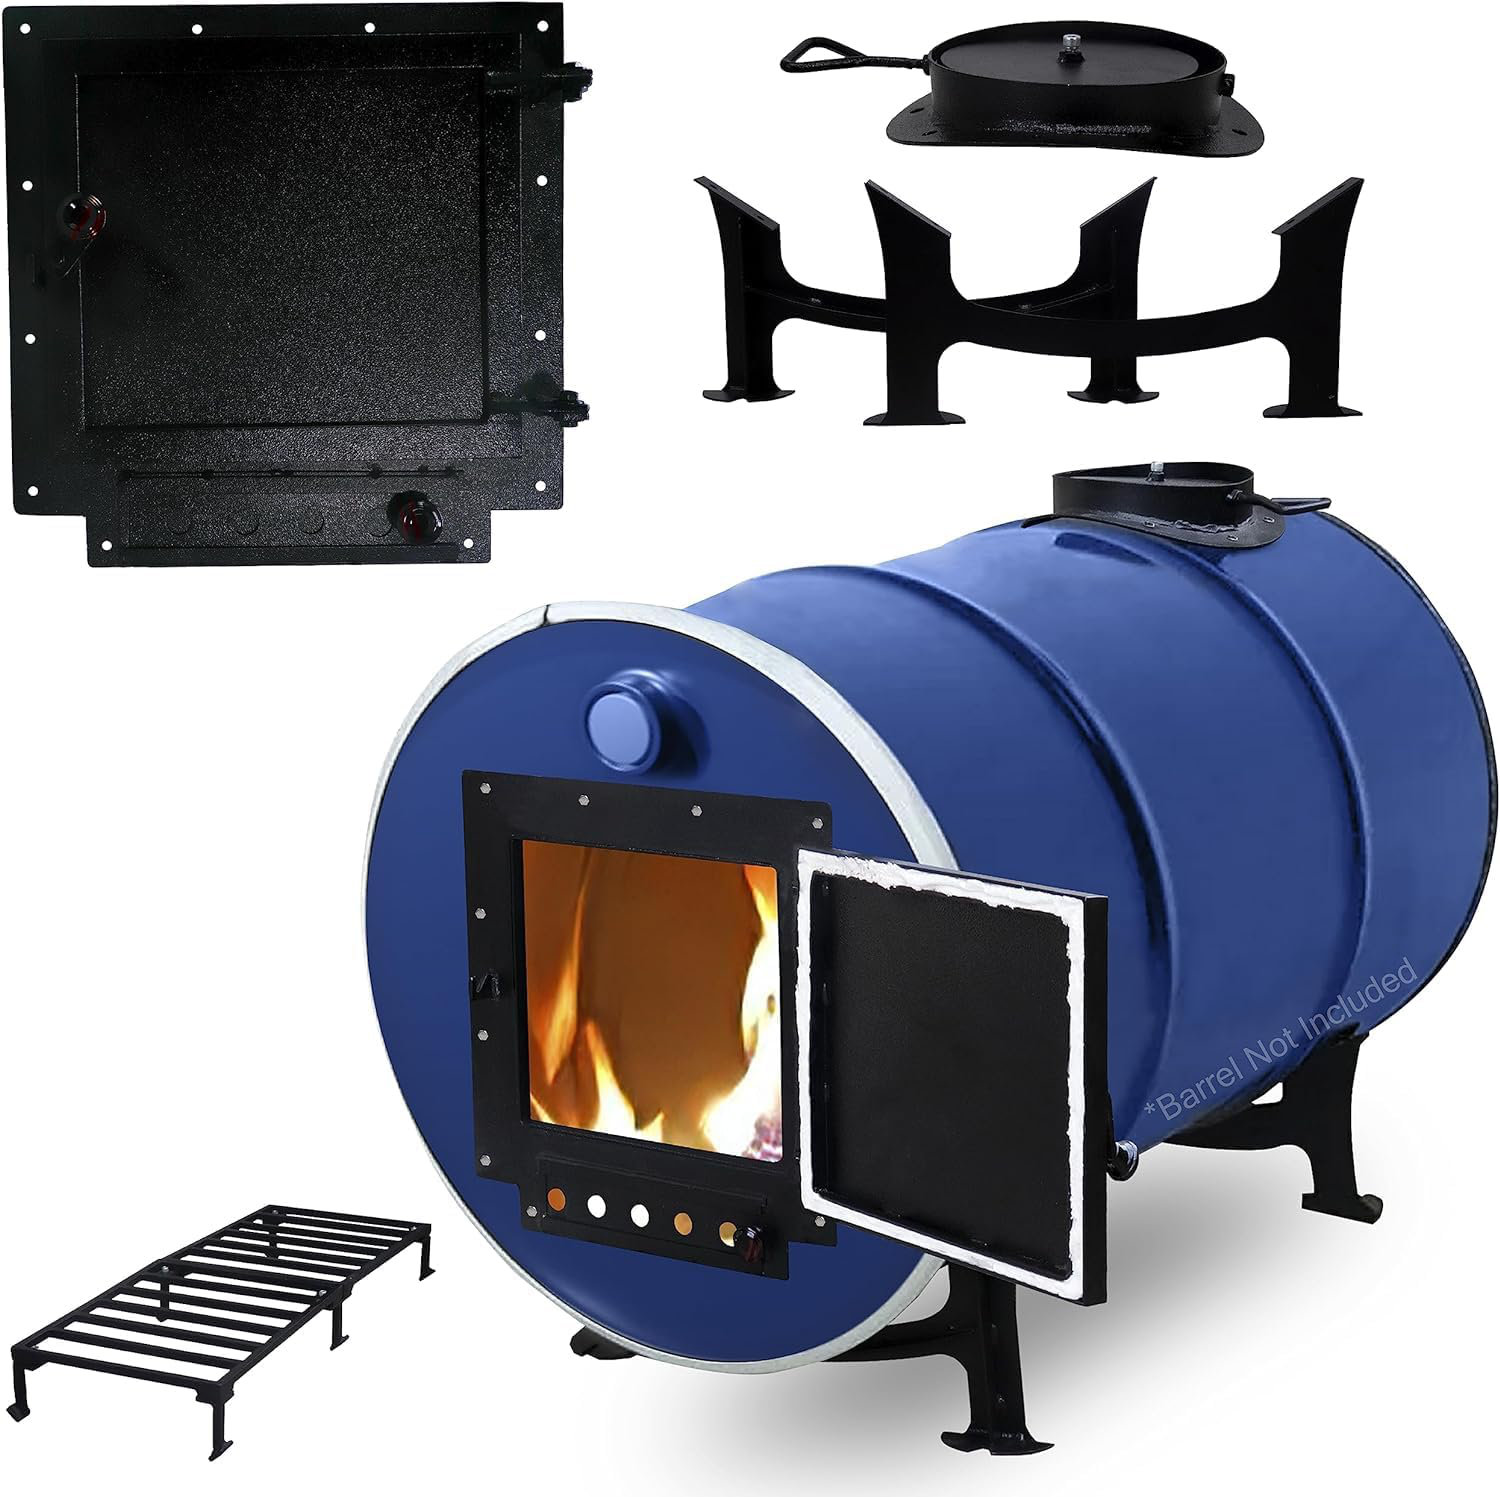 Sonret barrel stove kit with double barrel stove adapter kit – Perfect for  30 to 55 gallon drums - barrel woodstove kit - camping equipment barrel  stove kits - Fire wood camp stove for heating 